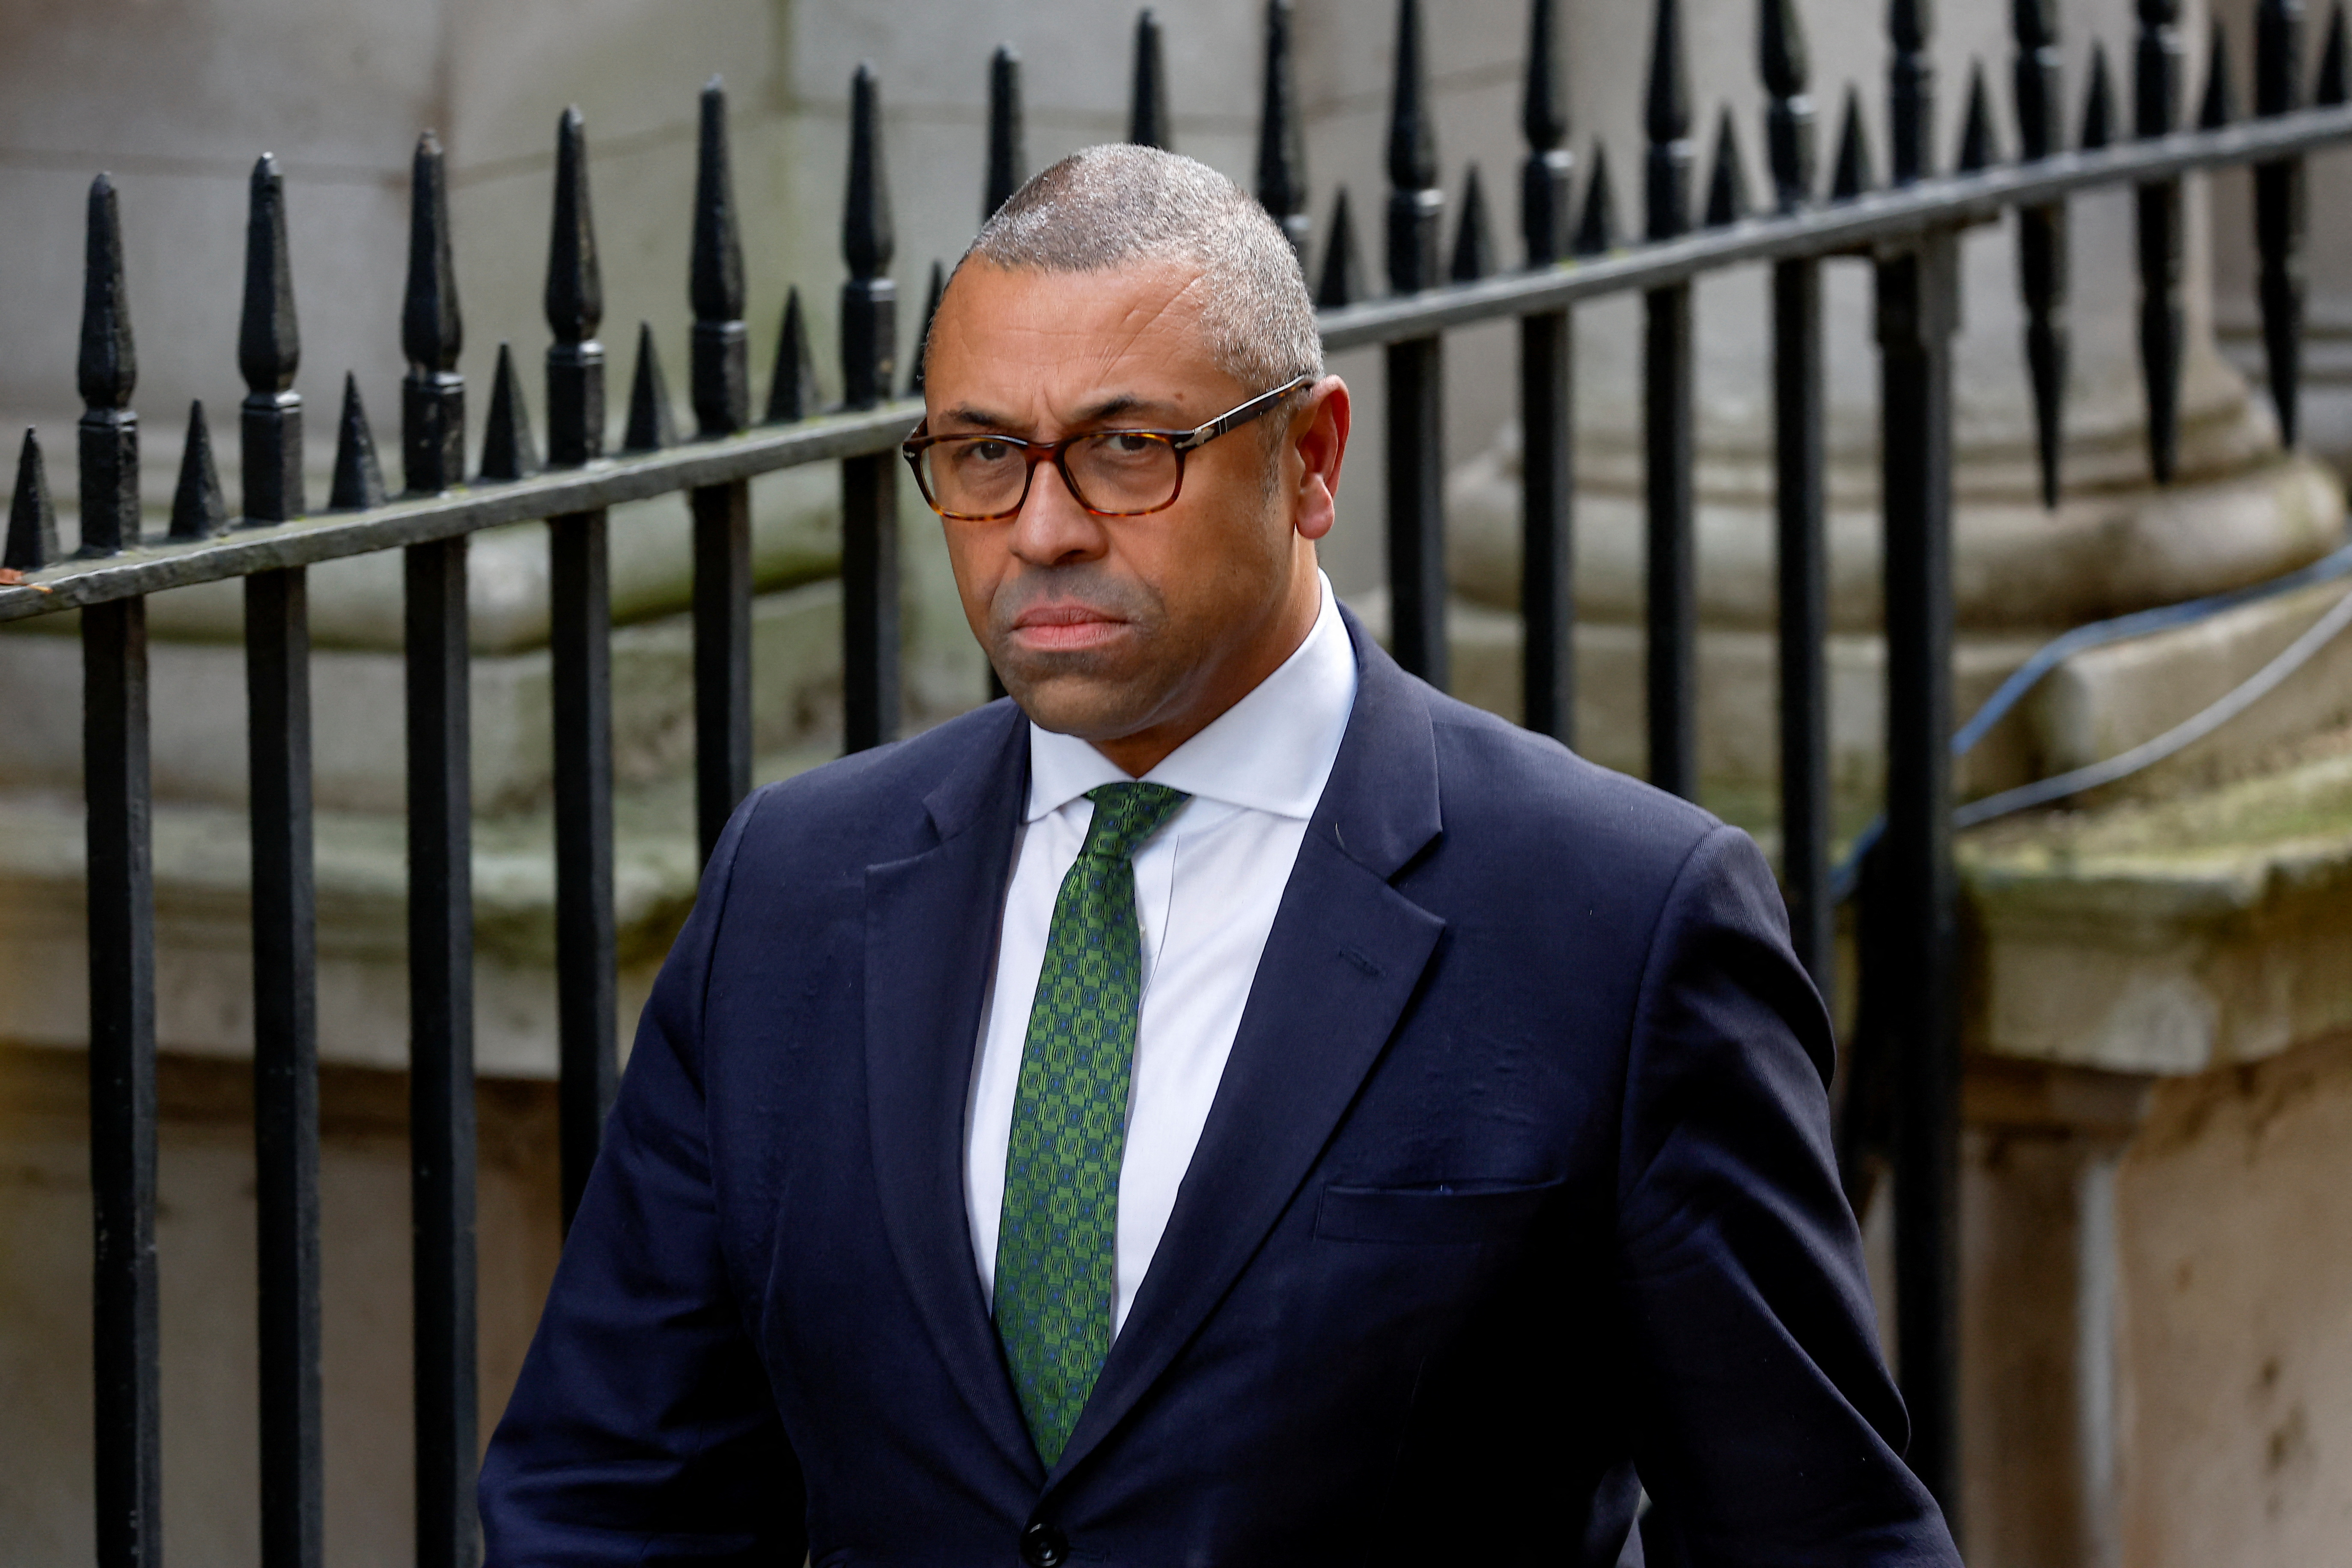 James Cleverly walks outside Number 10 Downing Street in London